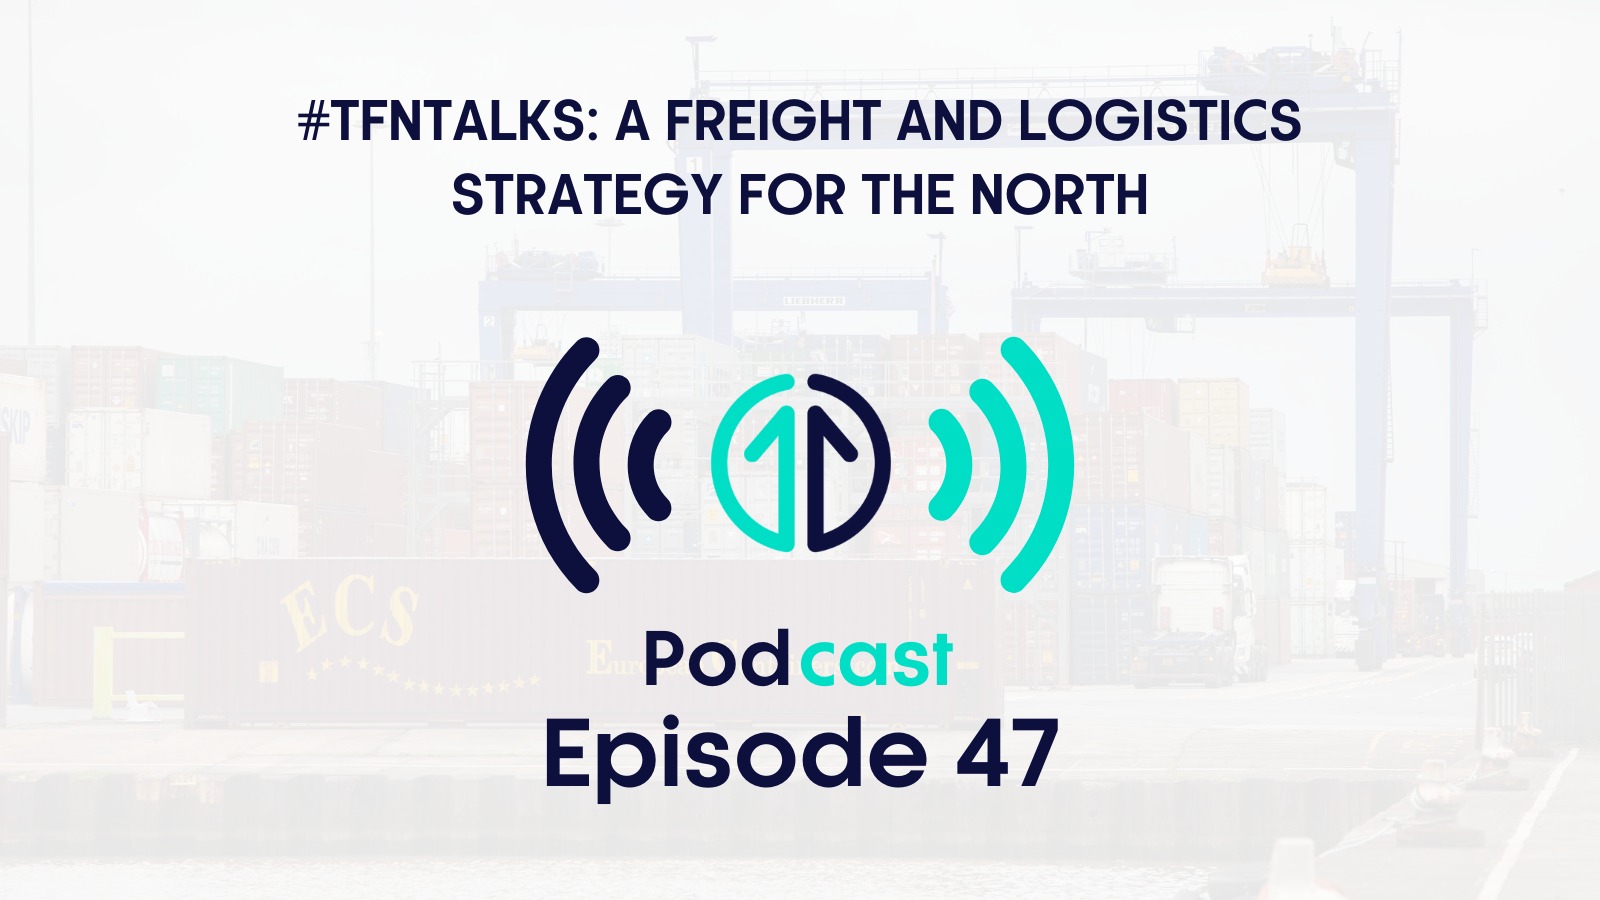 Podcast freight and logistics